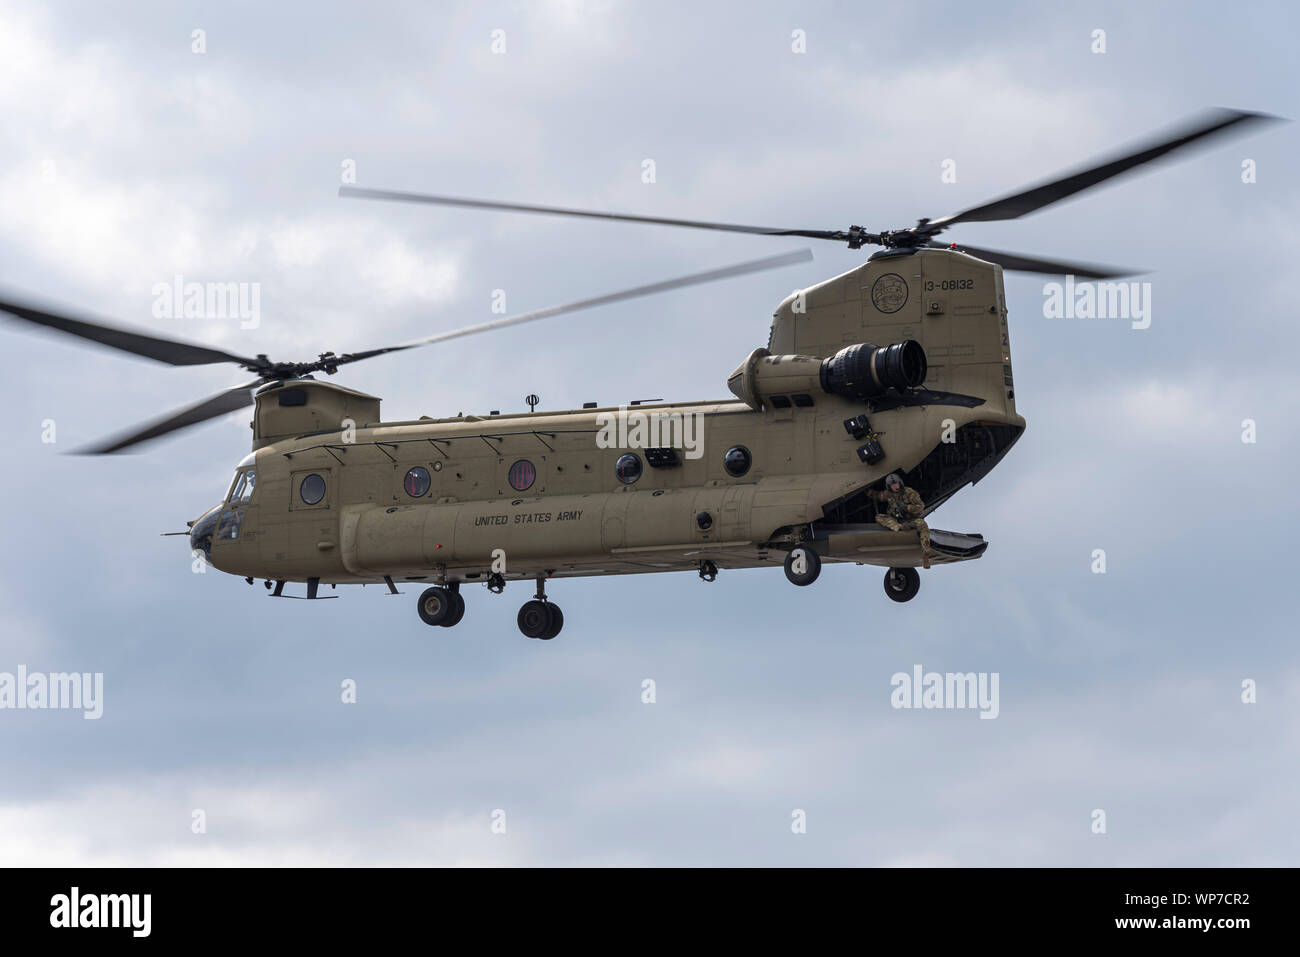 US-Armee Boeing CH-47F Chinook Hubschrauber Landung am Defence and Security Equipment International DSEI arme Fair Trade Show, ExCel, London, UK. Crewman Stockfoto